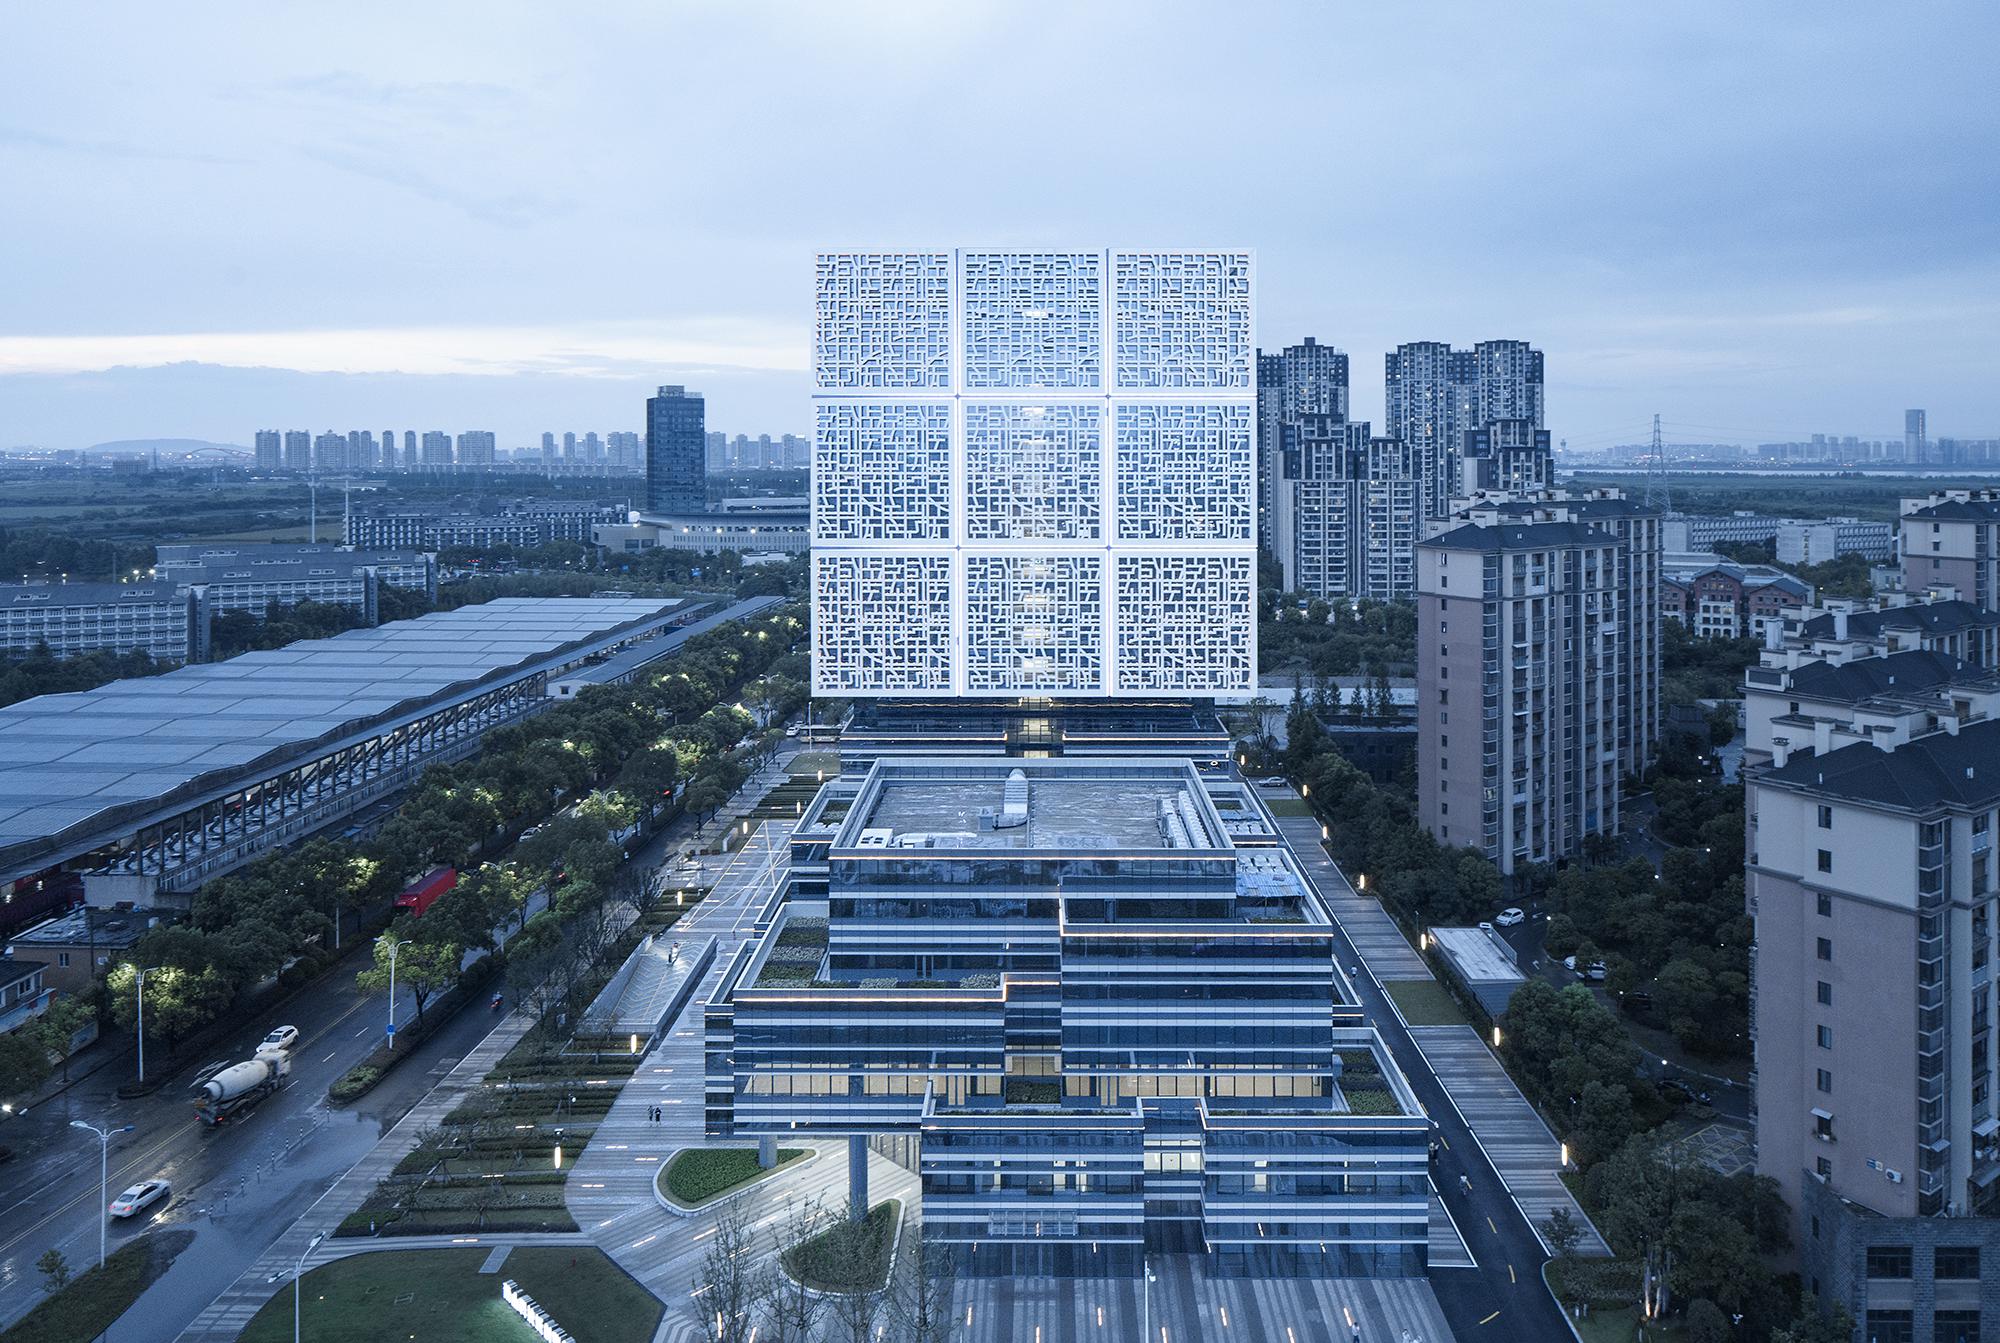 architectural design and research institute of zhejiang university